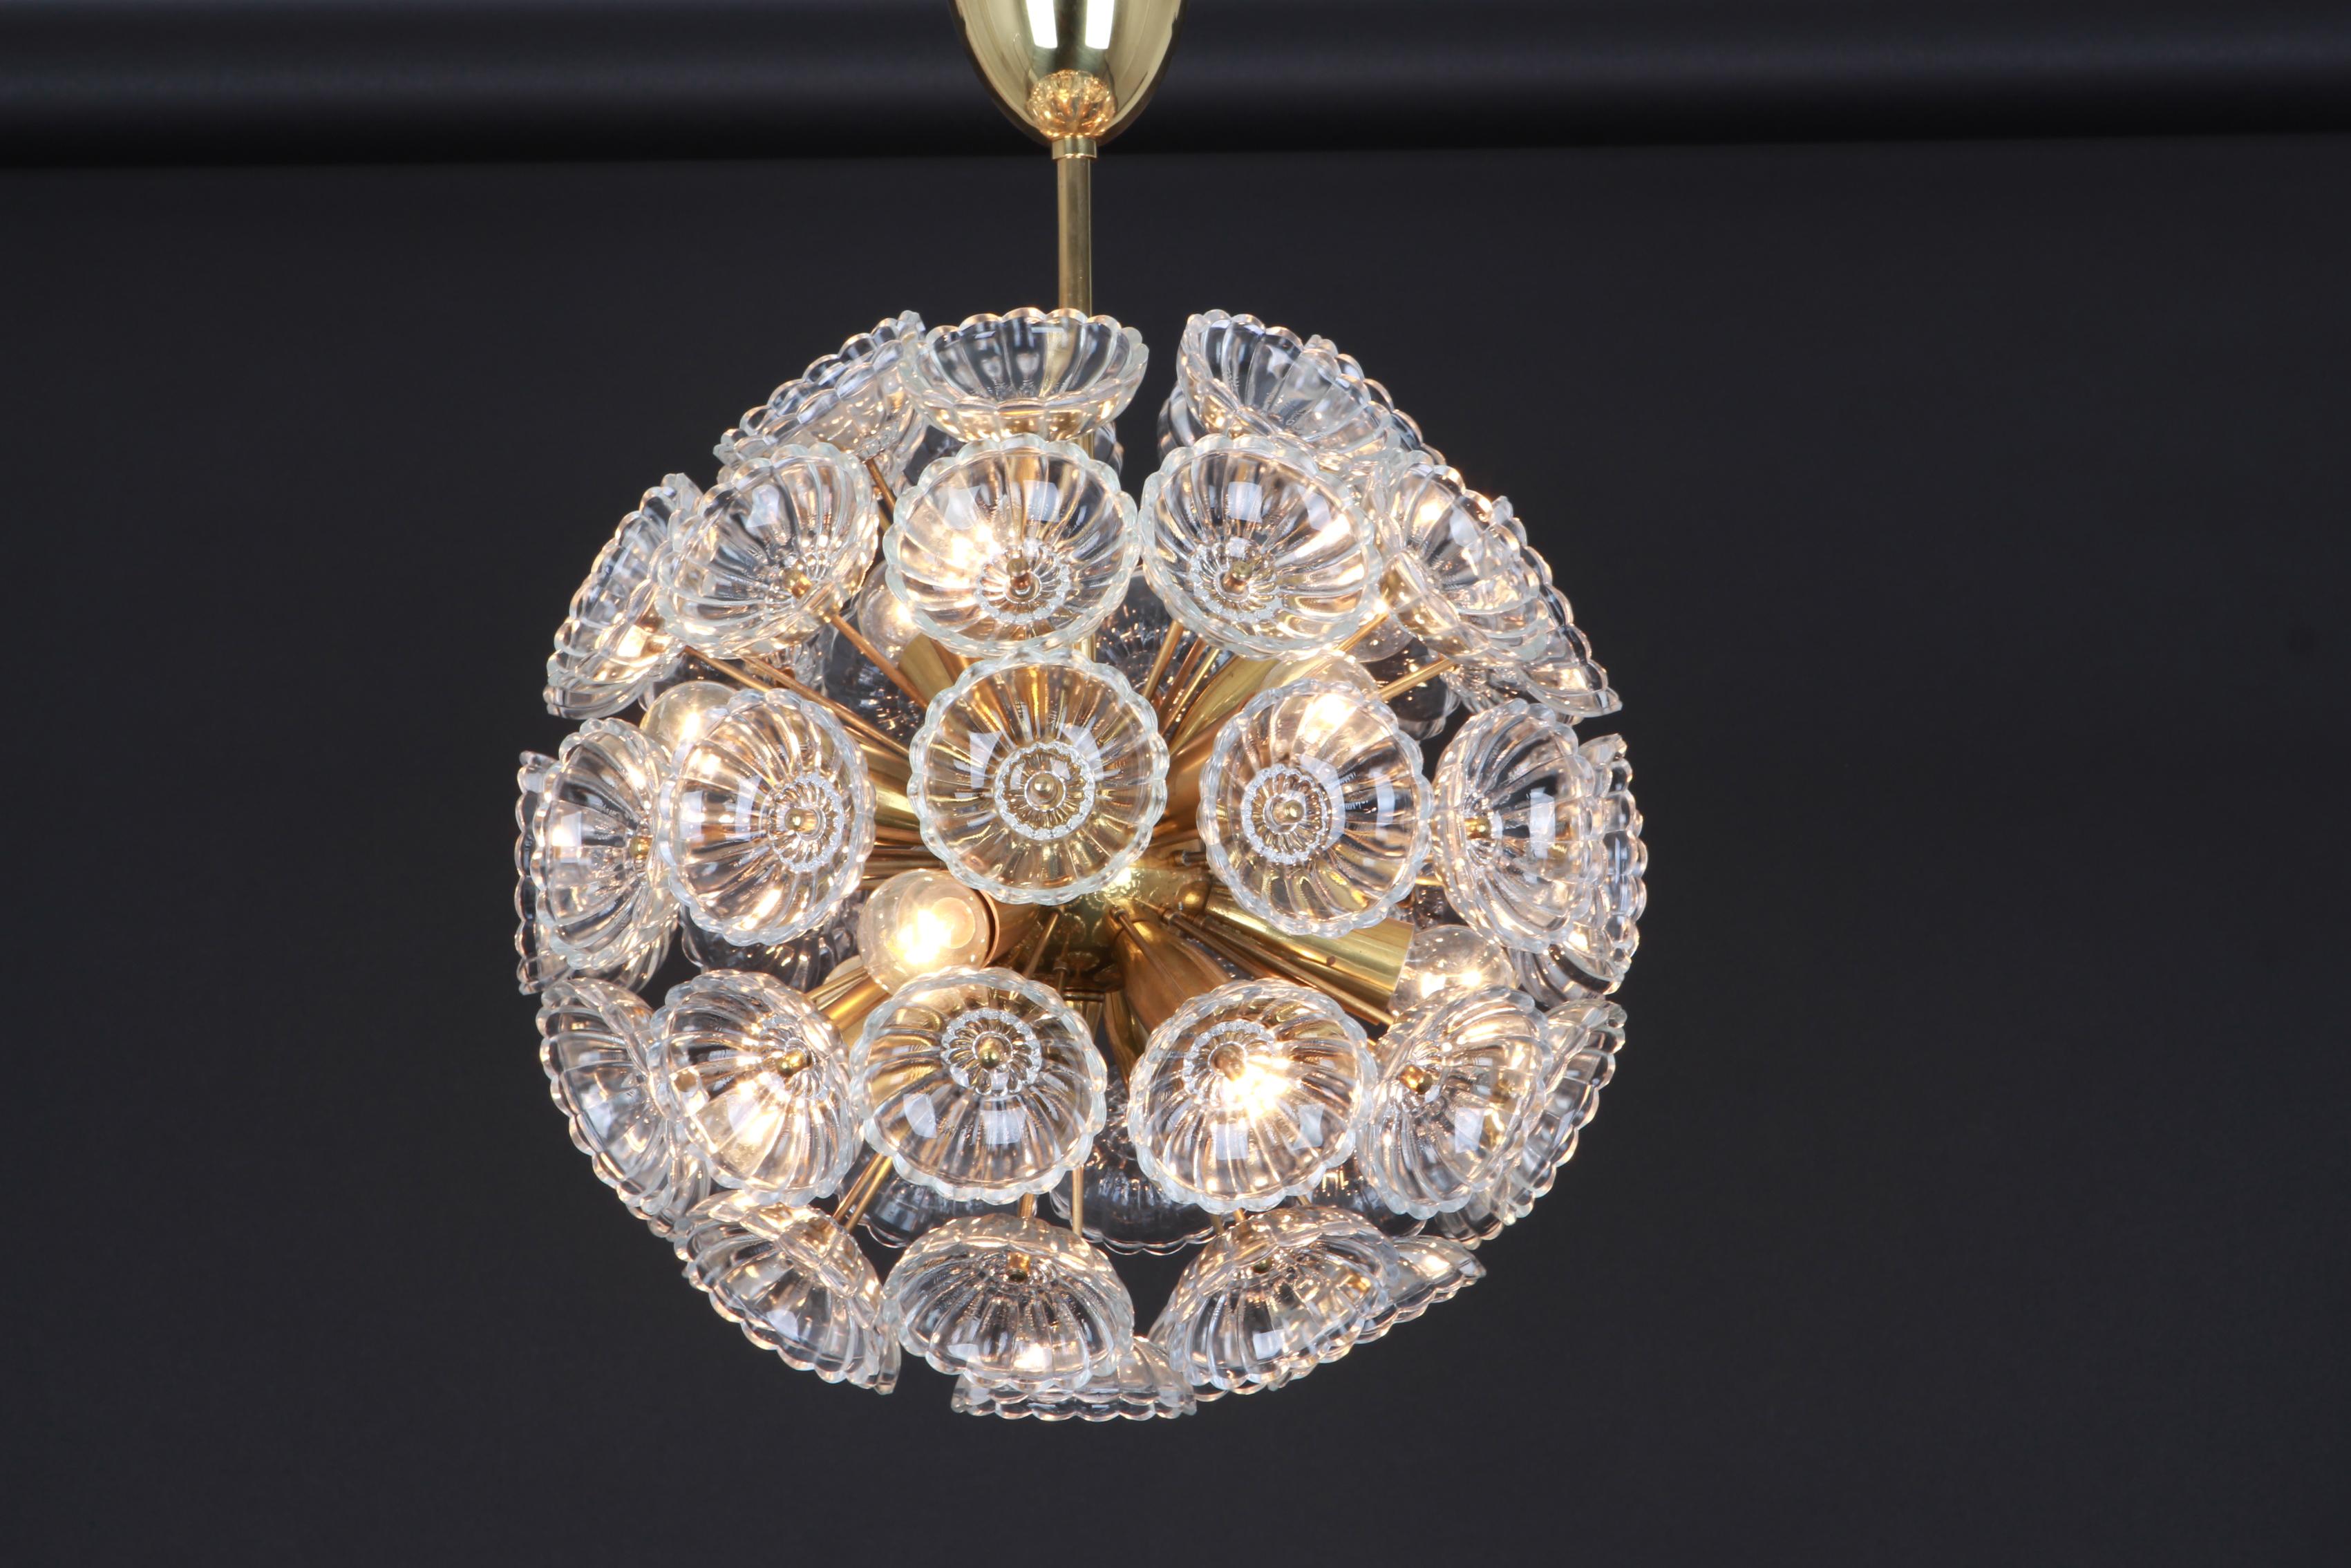 1 of 2 Stunning Floral Glass and Brass Sputnik Chandeliers, Germany, 1960s For Sale 2